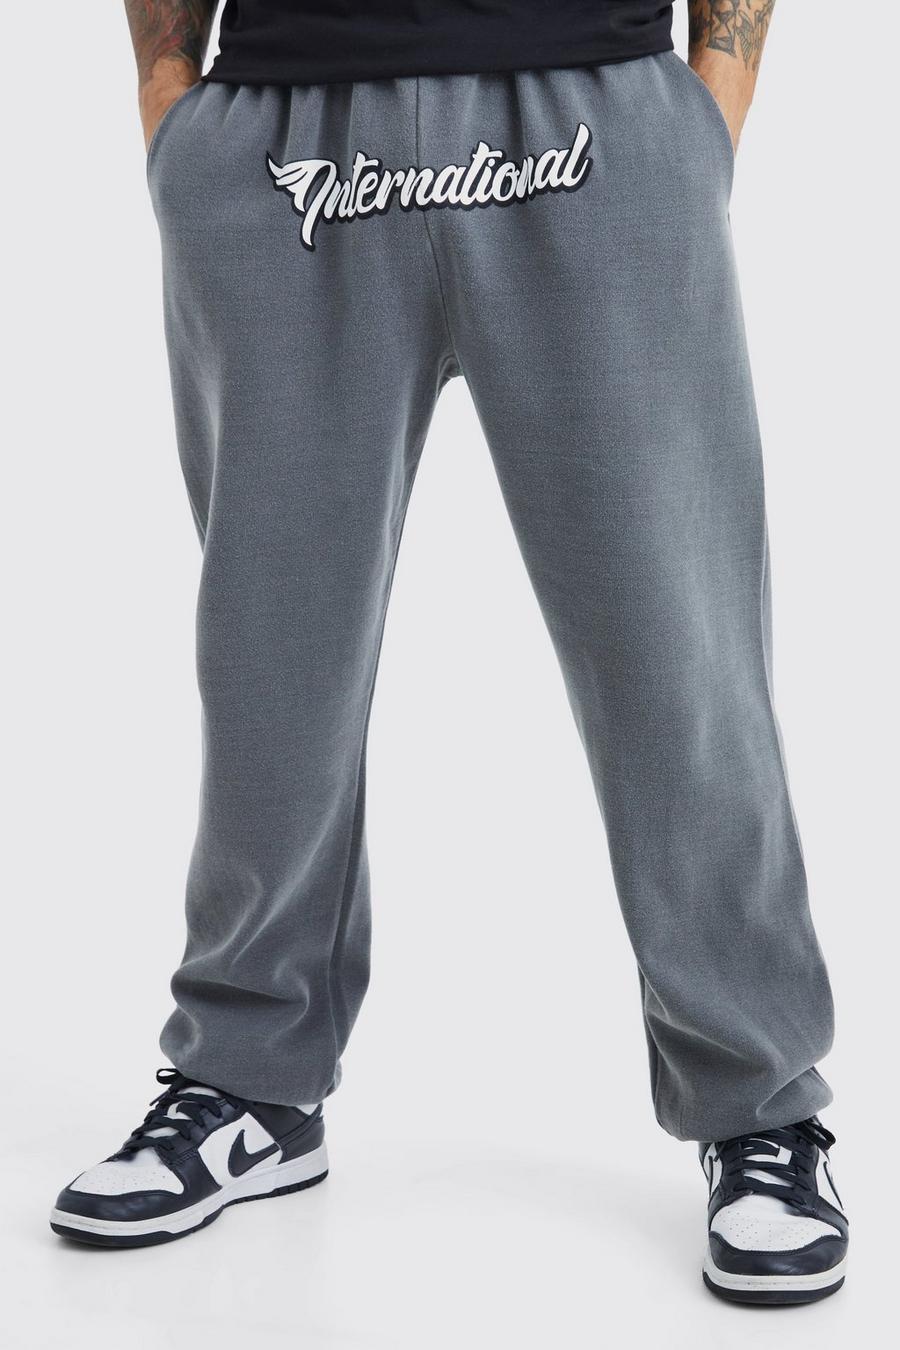 Charcoal Oversized Worldwide Crotch Graphic Jogger